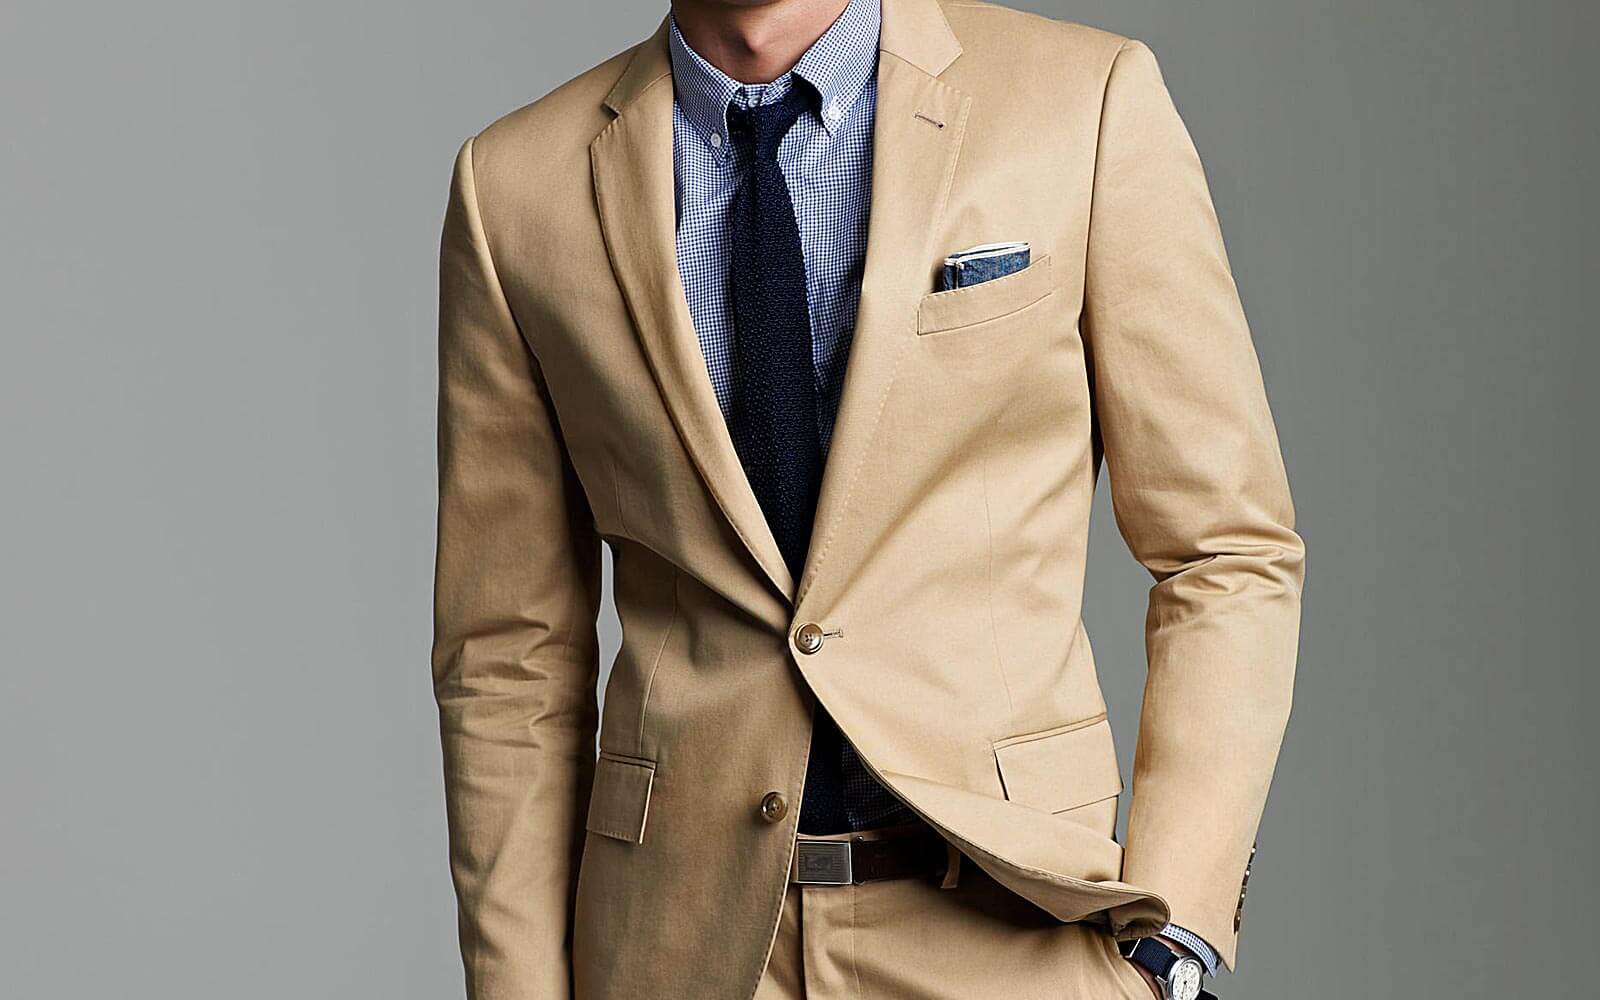 Men's Button Down Collar Semi-Formal Outfit